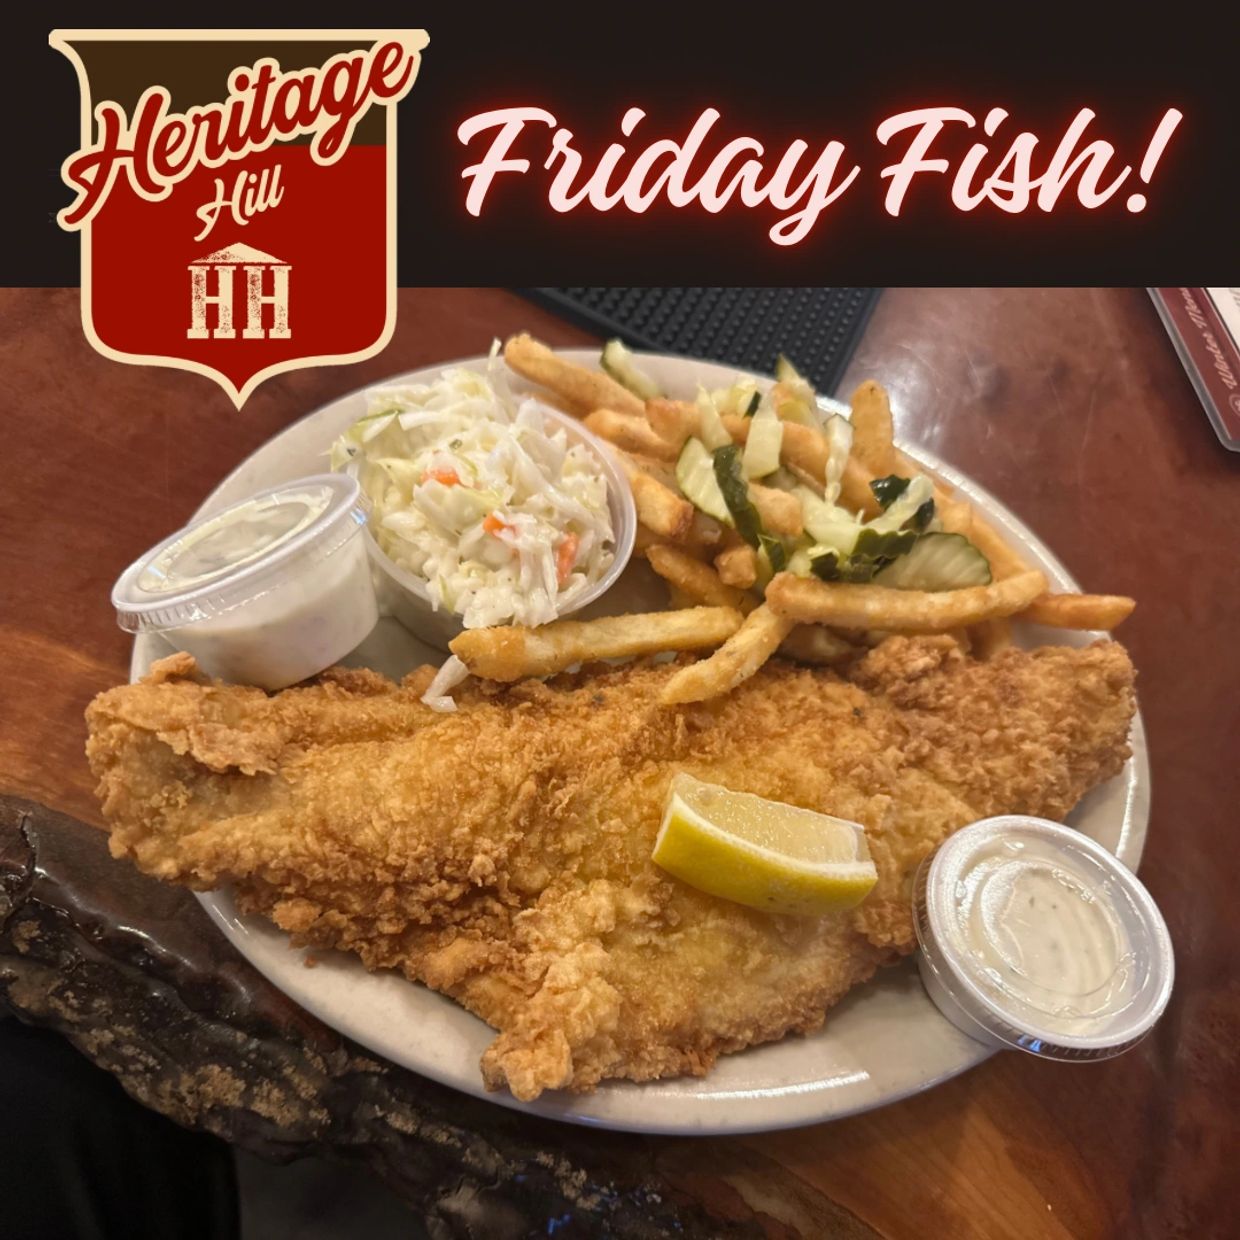 Only two weeks left to enjoy our delicious FRESH haddock dinners (fried or broiled) starting at noon